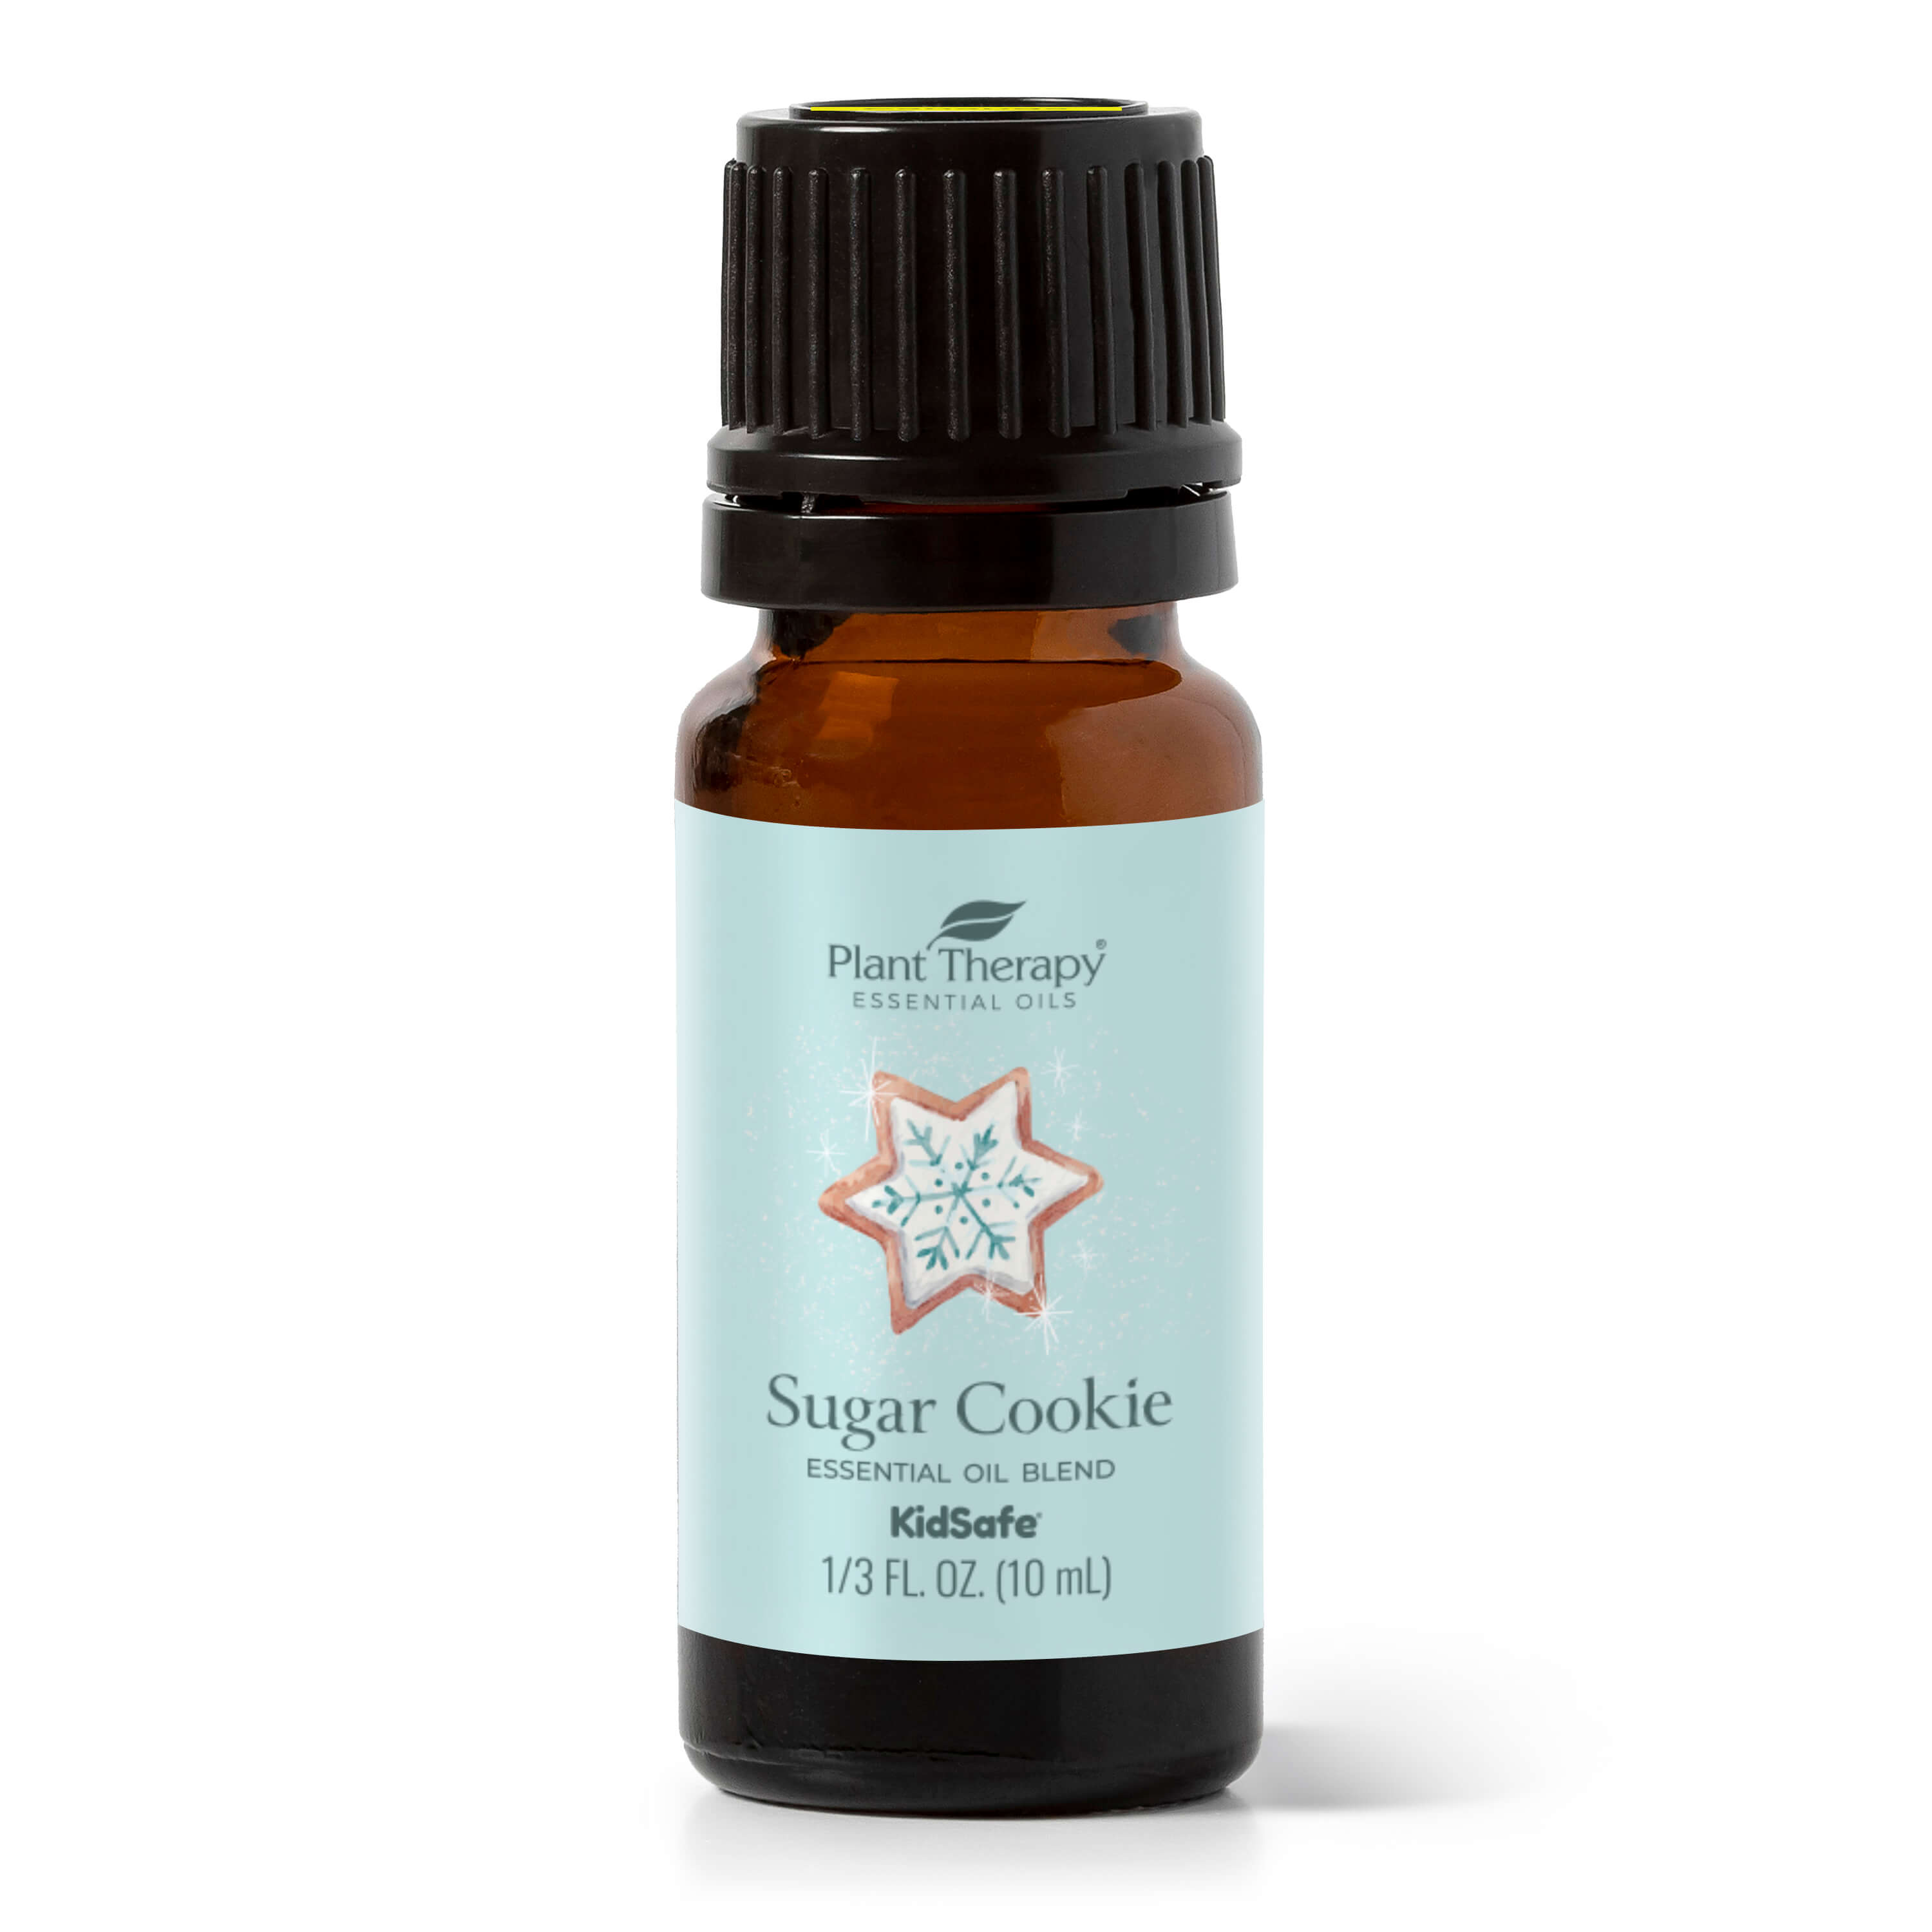 Plant Therapy Sugar Cookie Holiday Essential Oil Blend 100% Pure, Undiluted, Natural Aromatherapy, Therapeutic Grade 10 ml (1/3 oz)